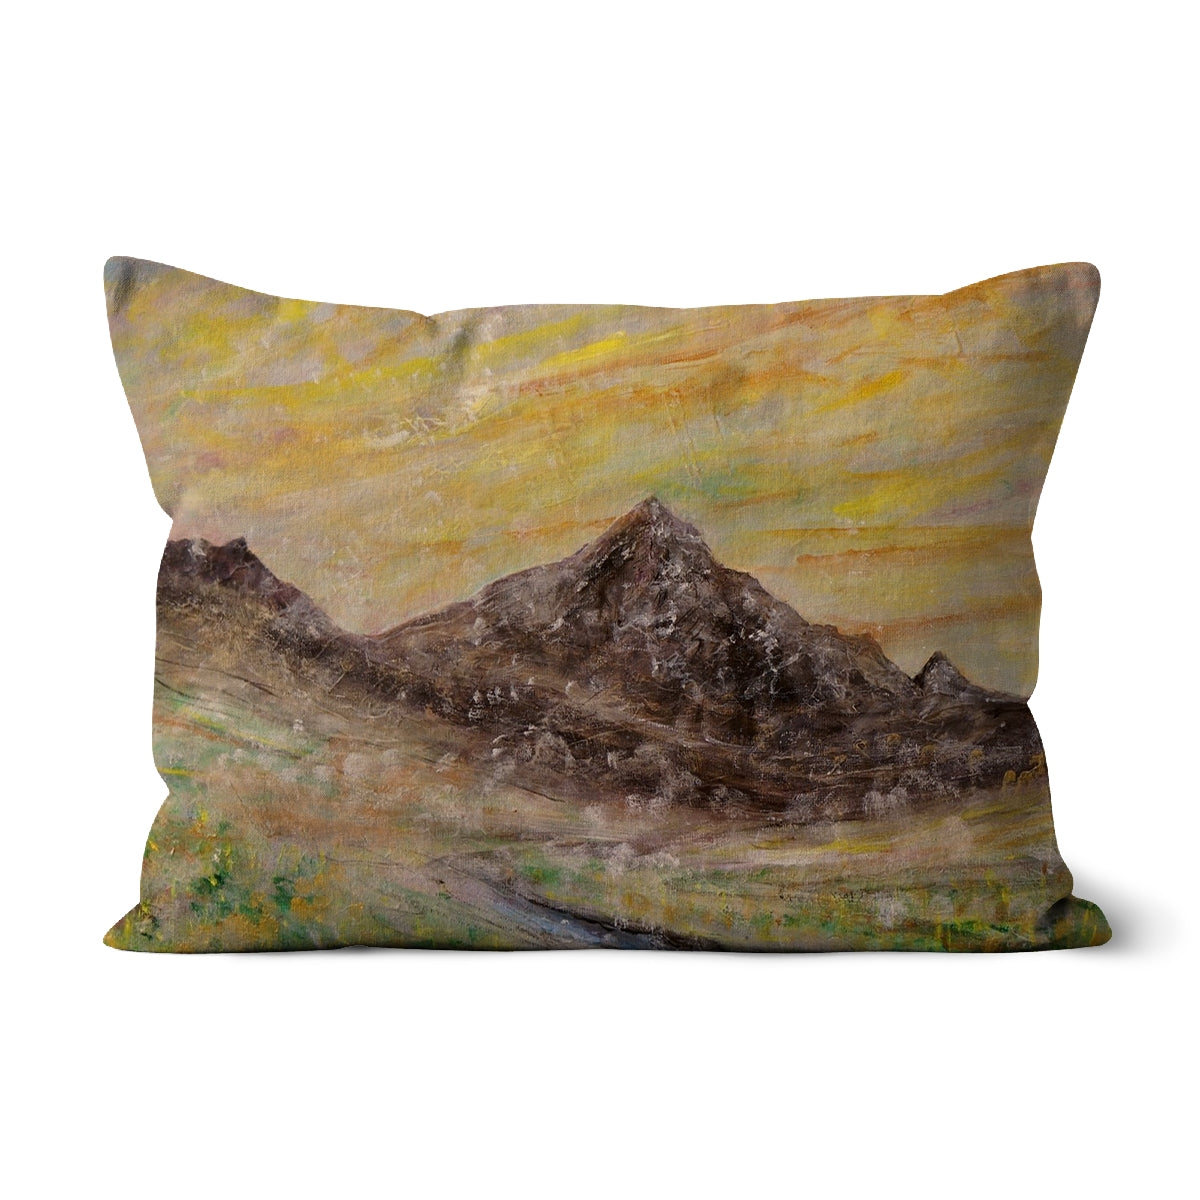 Glen Rosa Mist Arran Art Gifts Cushion-Cushions-Arran Art Gallery-Faux Suede-19"x13"-Paintings, Prints, Homeware, Art Gifts From Scotland By Scottish Artist Kevin Hunter